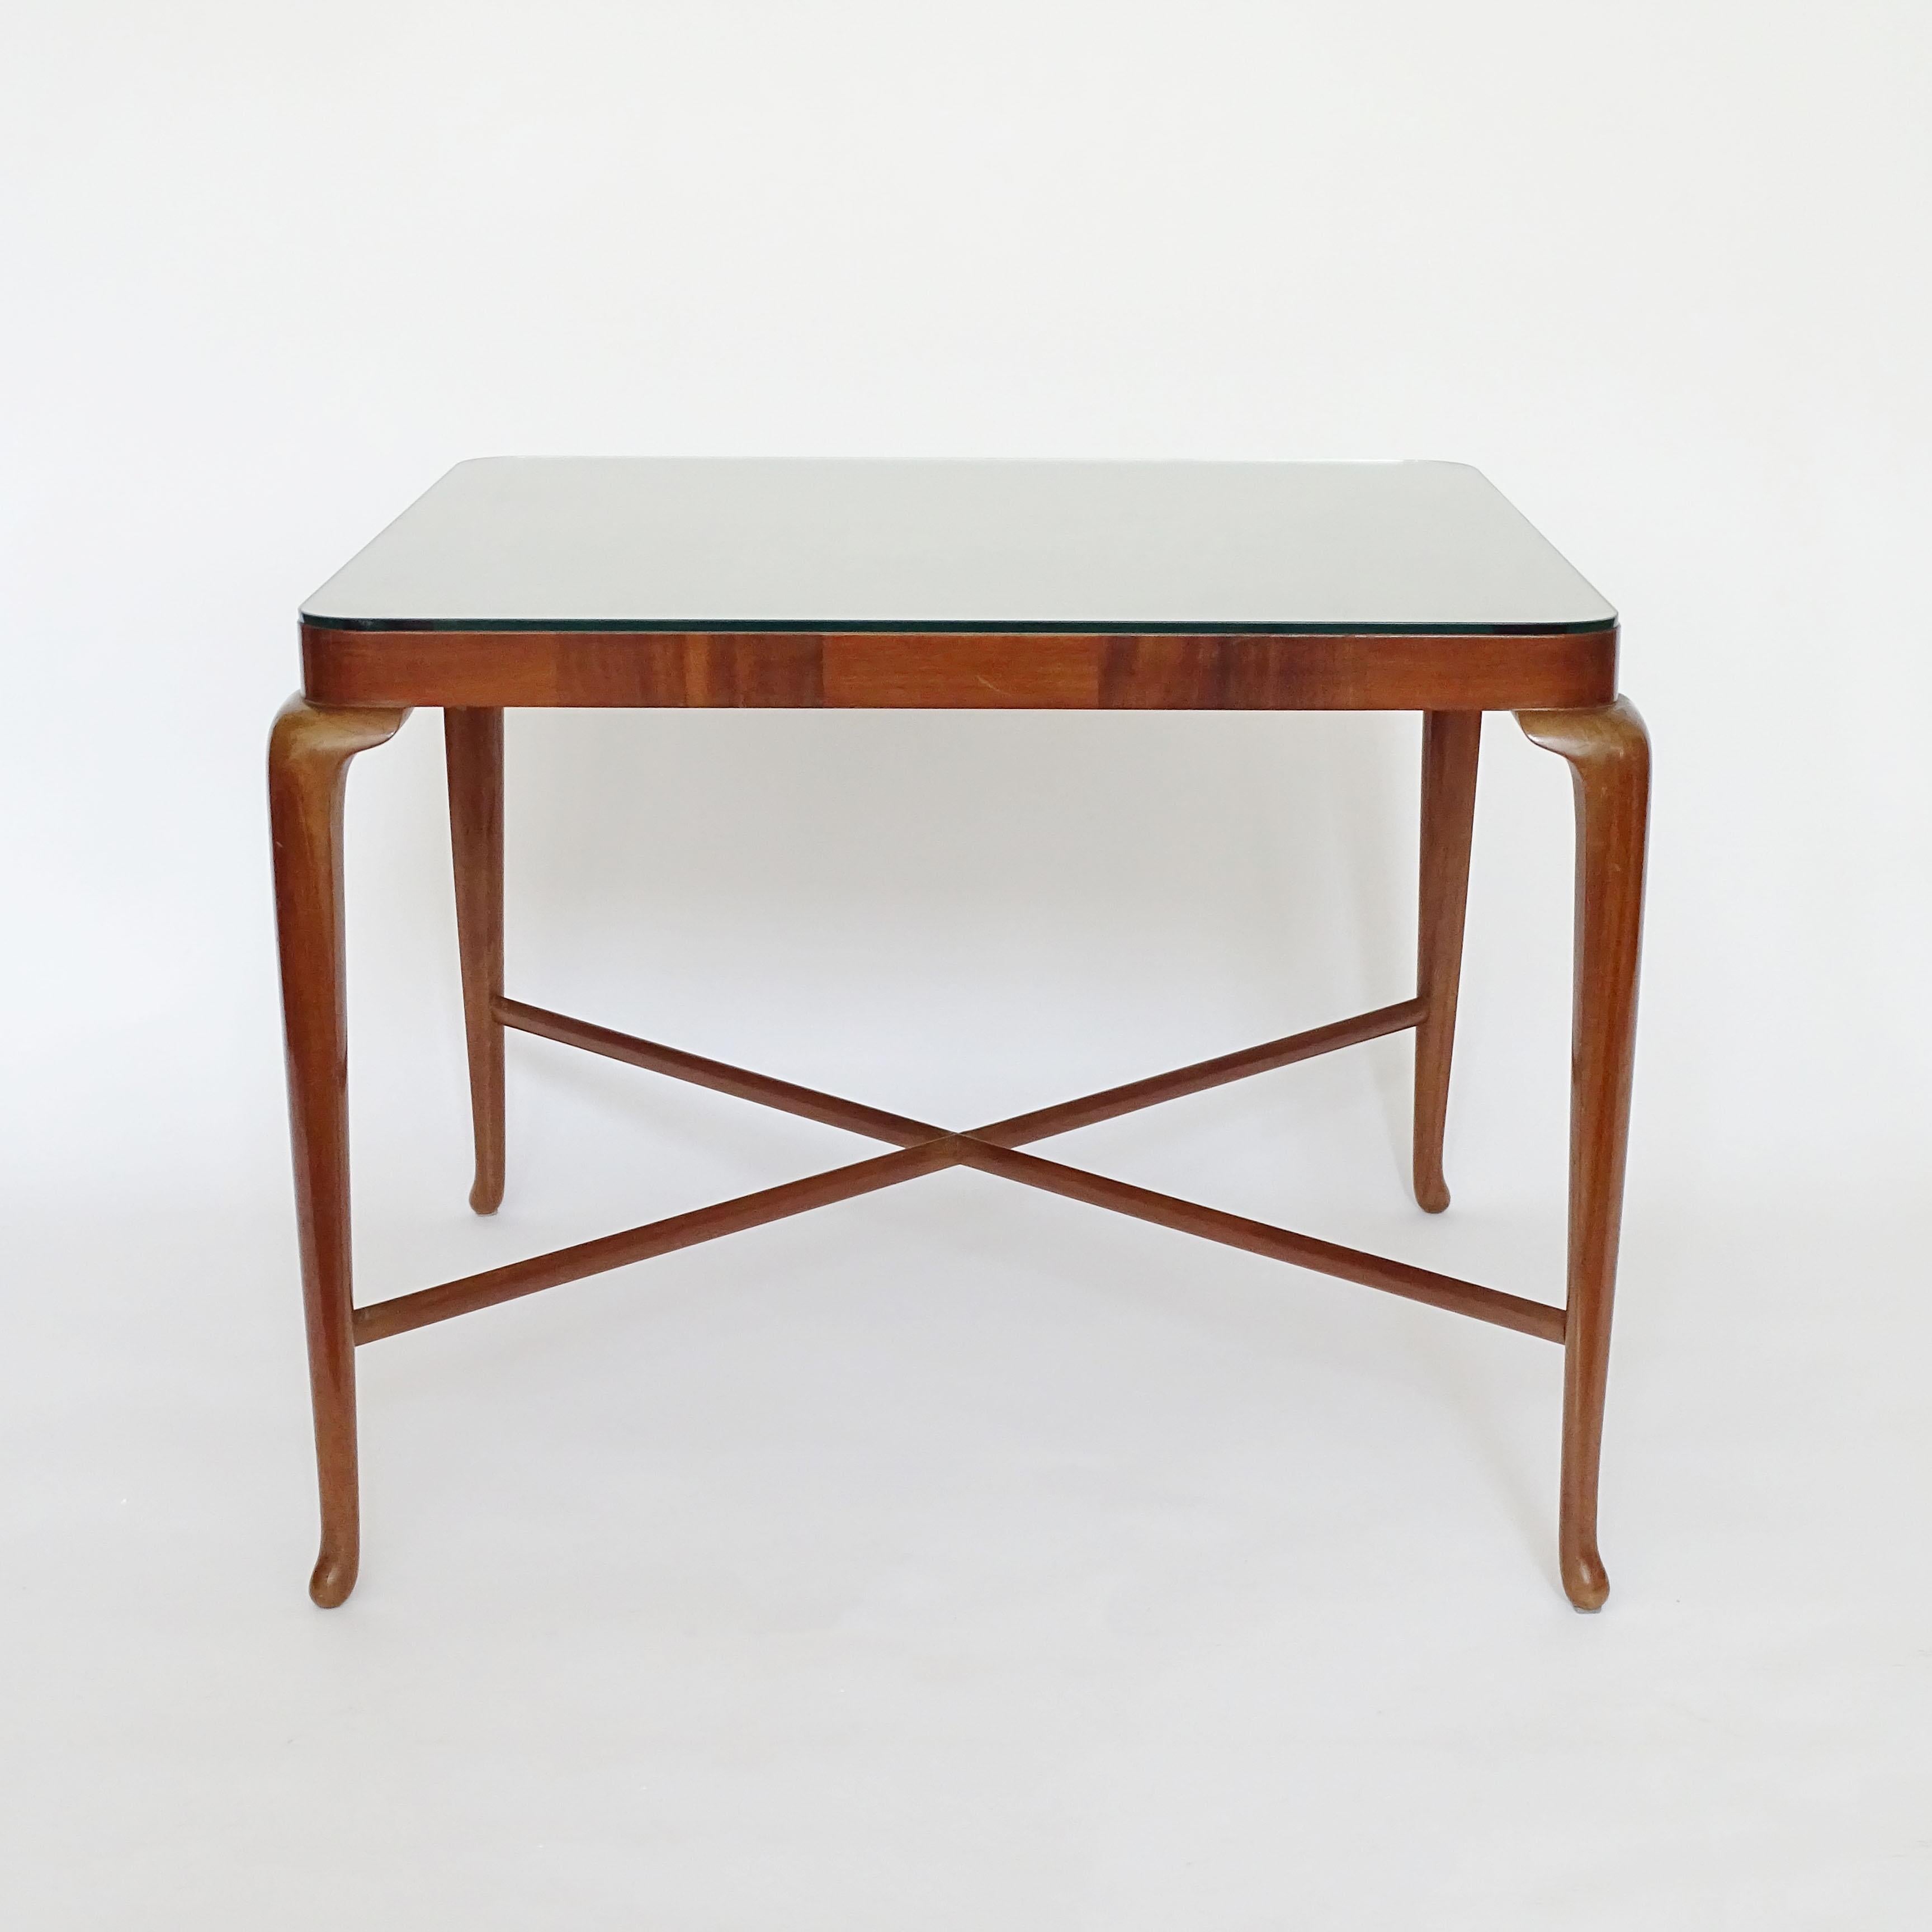 Paolo Buffa beautifully executed wooden coffee table with squares top,
Glass protective top.
Italy, 1940s.